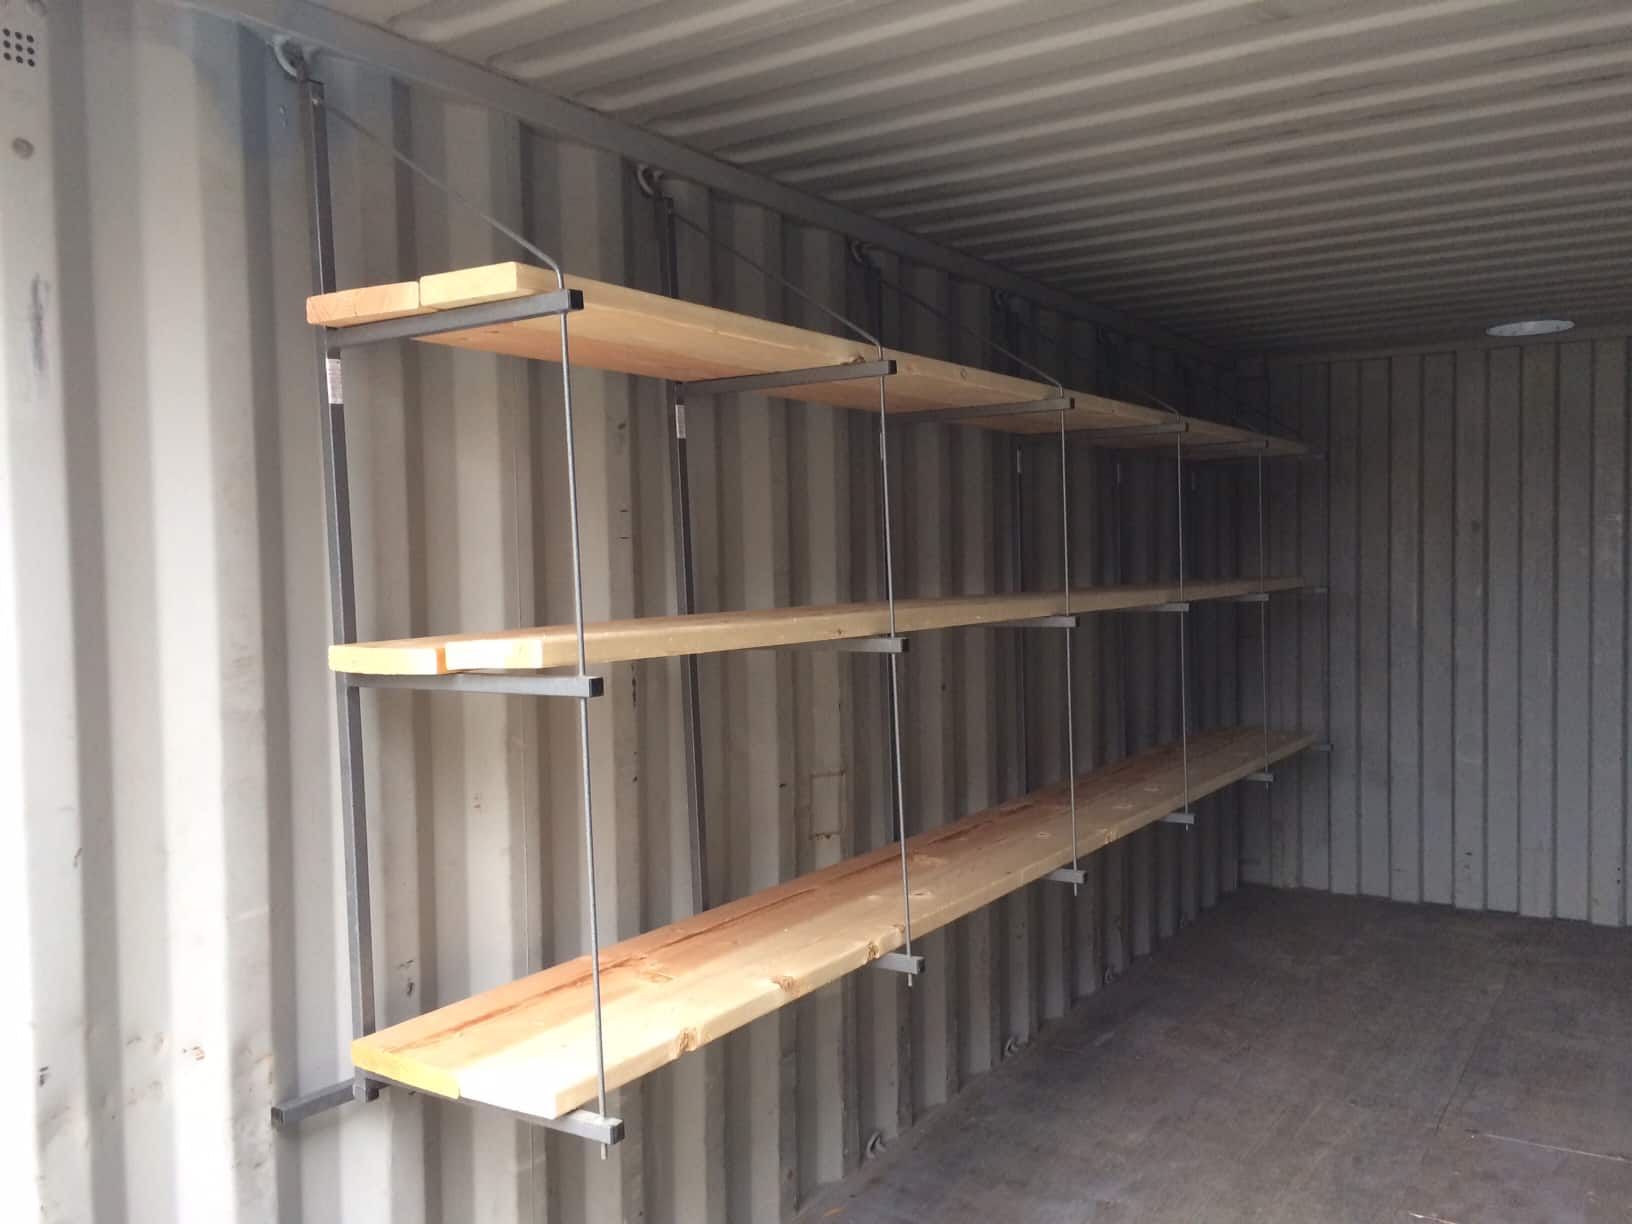 Image of shelves inside storage container